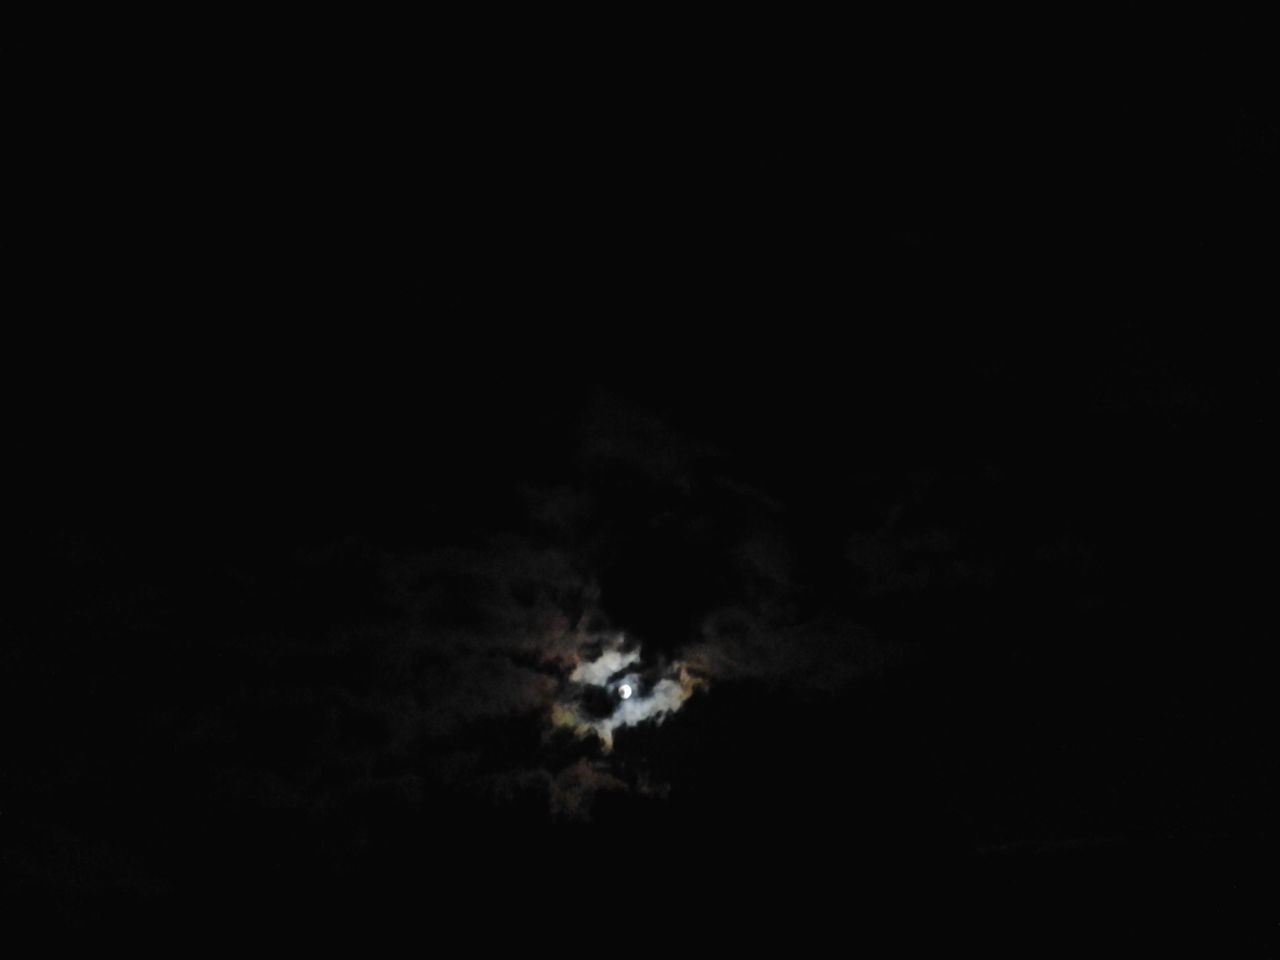 night, copy space, dark, low angle view, beauty in nature, scenics, tranquility, sky, tranquil scene, nature, silhouette, idyllic, no people, sky only, backgrounds, outdoors, majestic, moon, cloud - sky, dusk